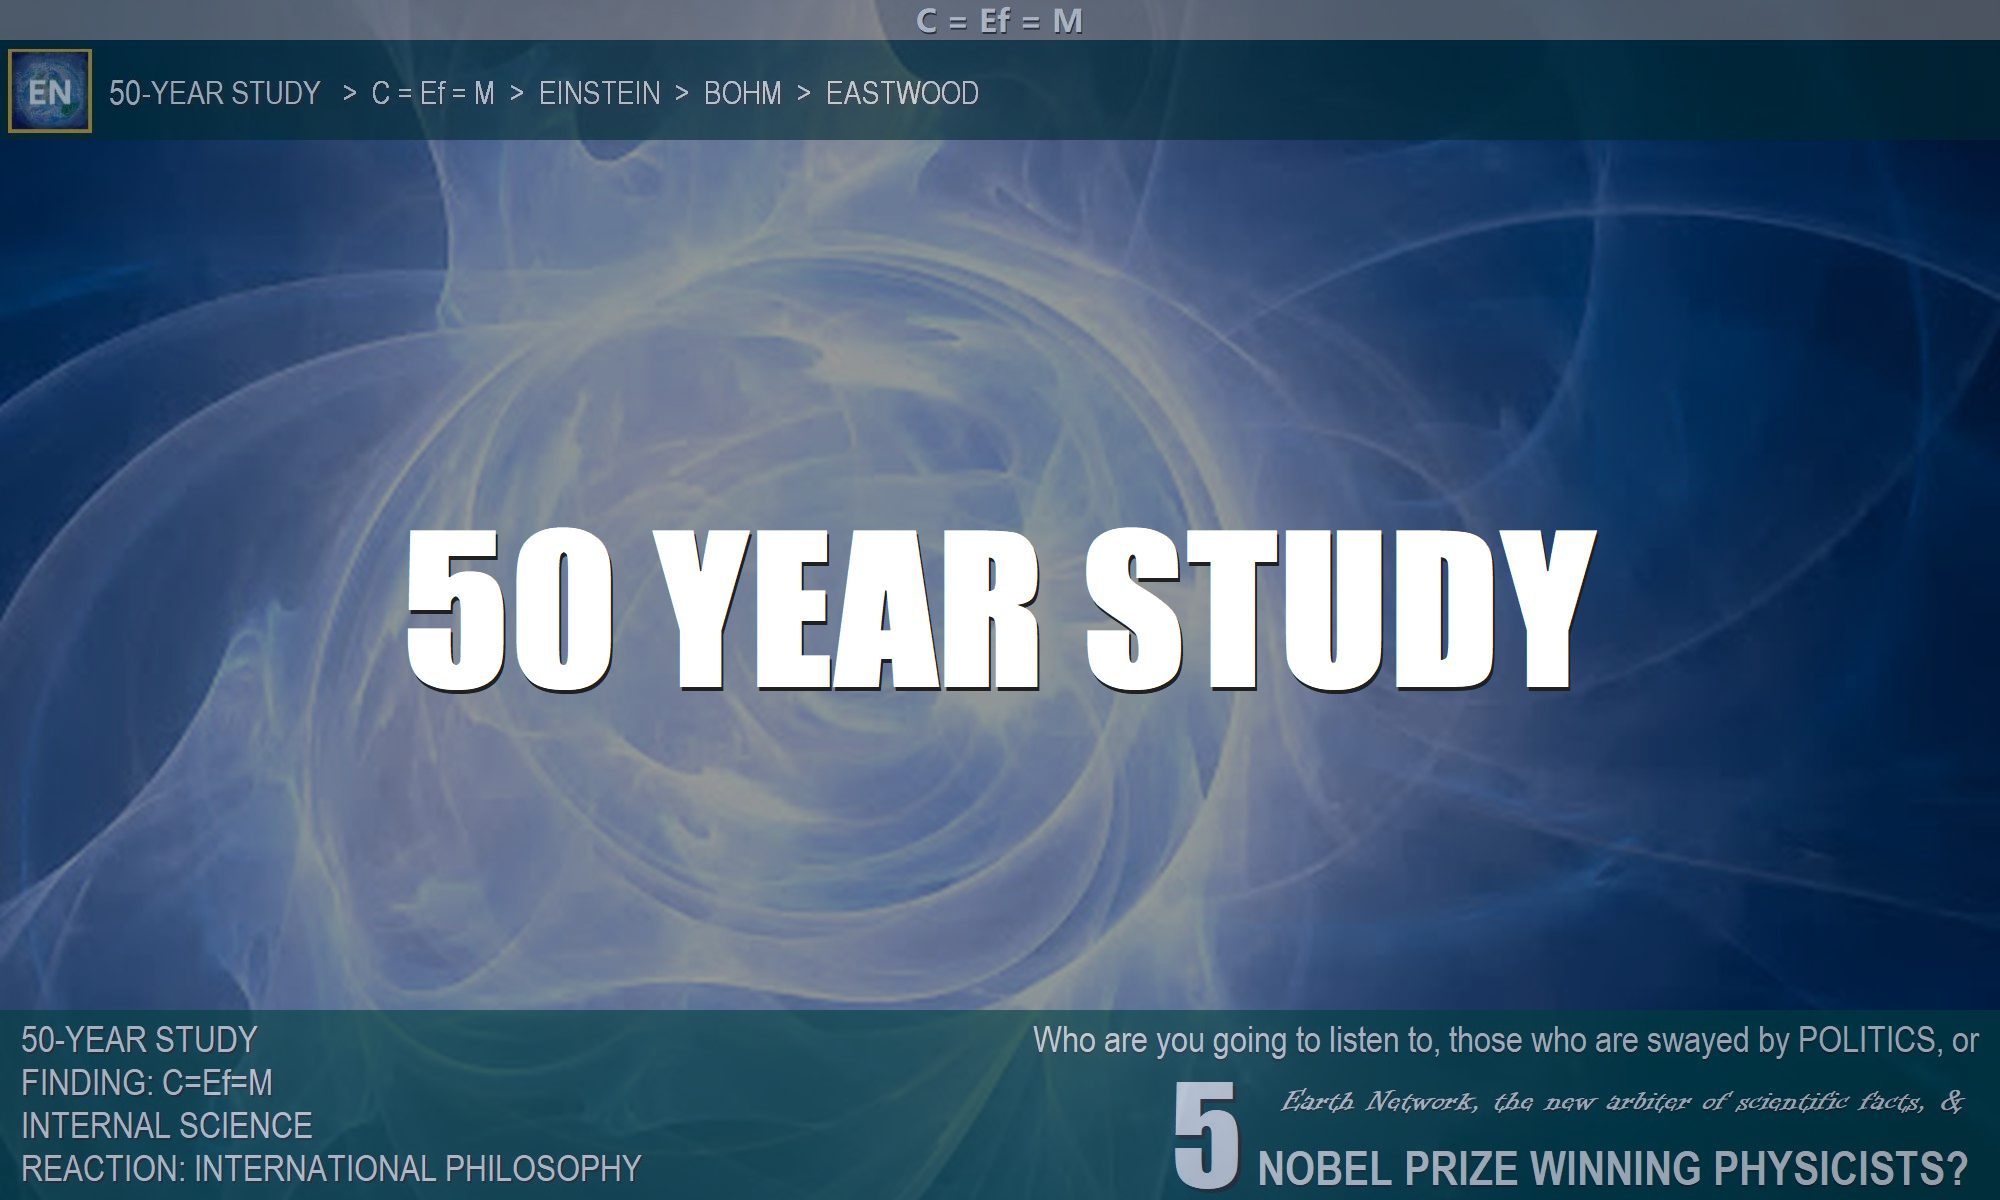 A LIFETIME STUDY: The Application of Metaphysical Principles for Over 45 Years